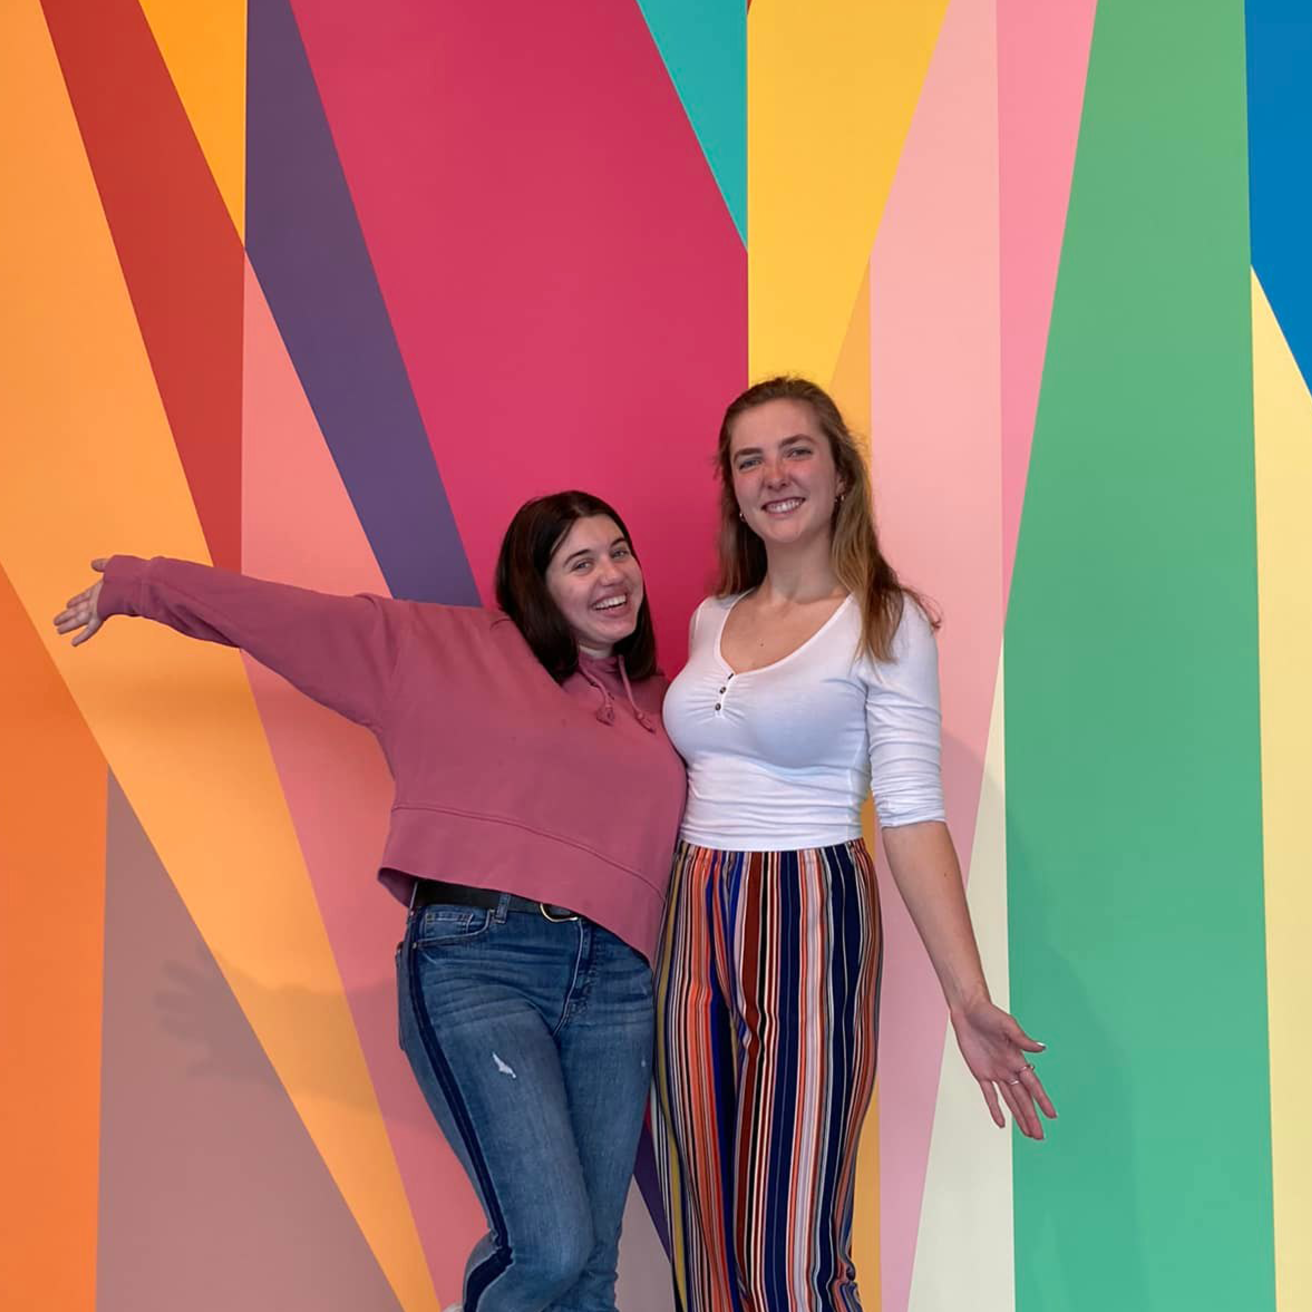 Two students embrace, posing in front of Odili Donald Odita's mural entitled "Surrounding" in the Stanley Museum of Art lobby.